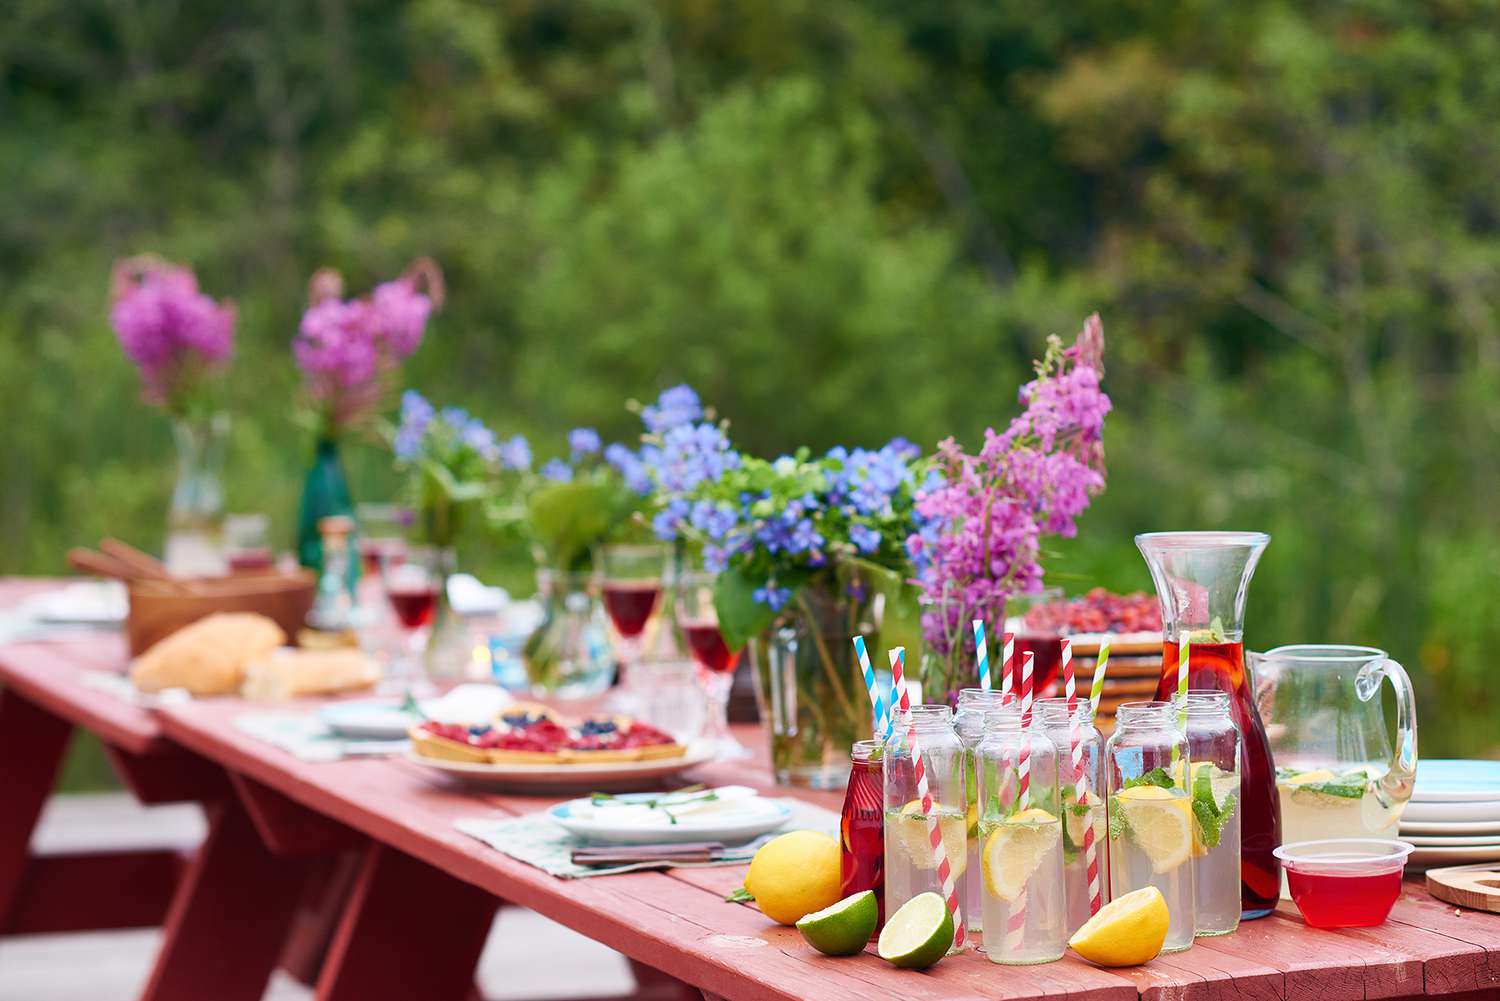 12 Tips for Hosting a Successful Summer Barbecue or Cookout [Video]